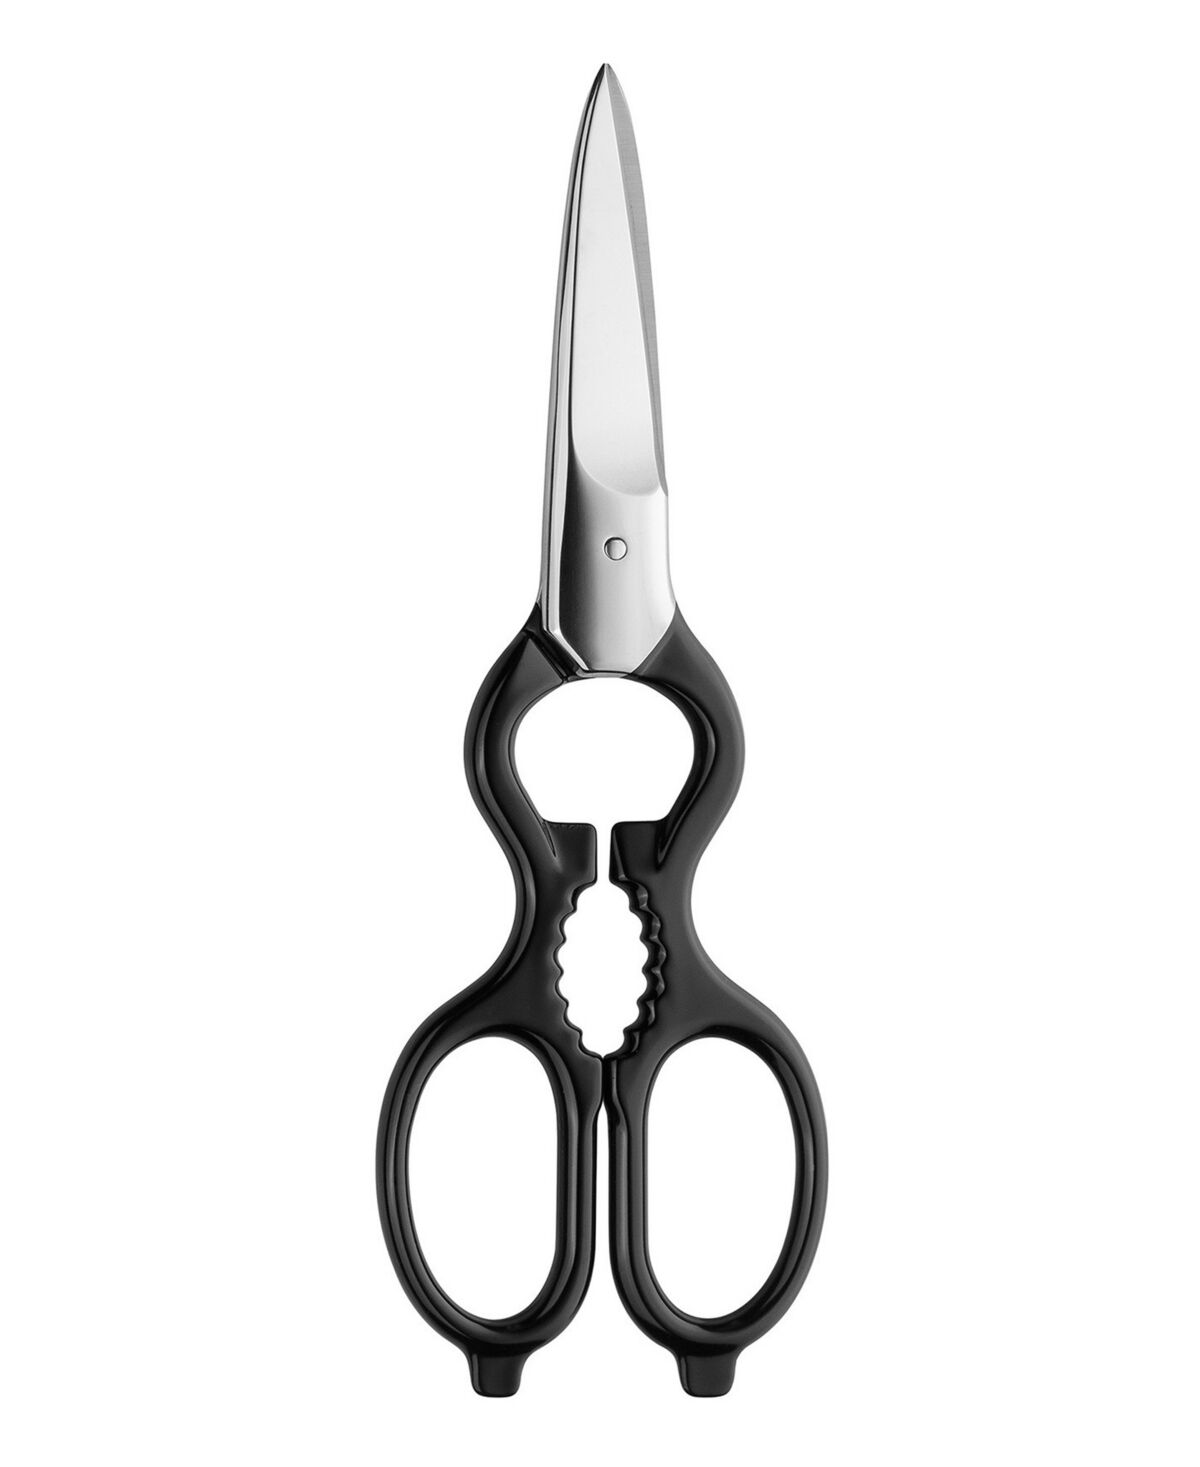 Zwilling Forged Multi-Purpose Kitchen Shears with Handle - Black